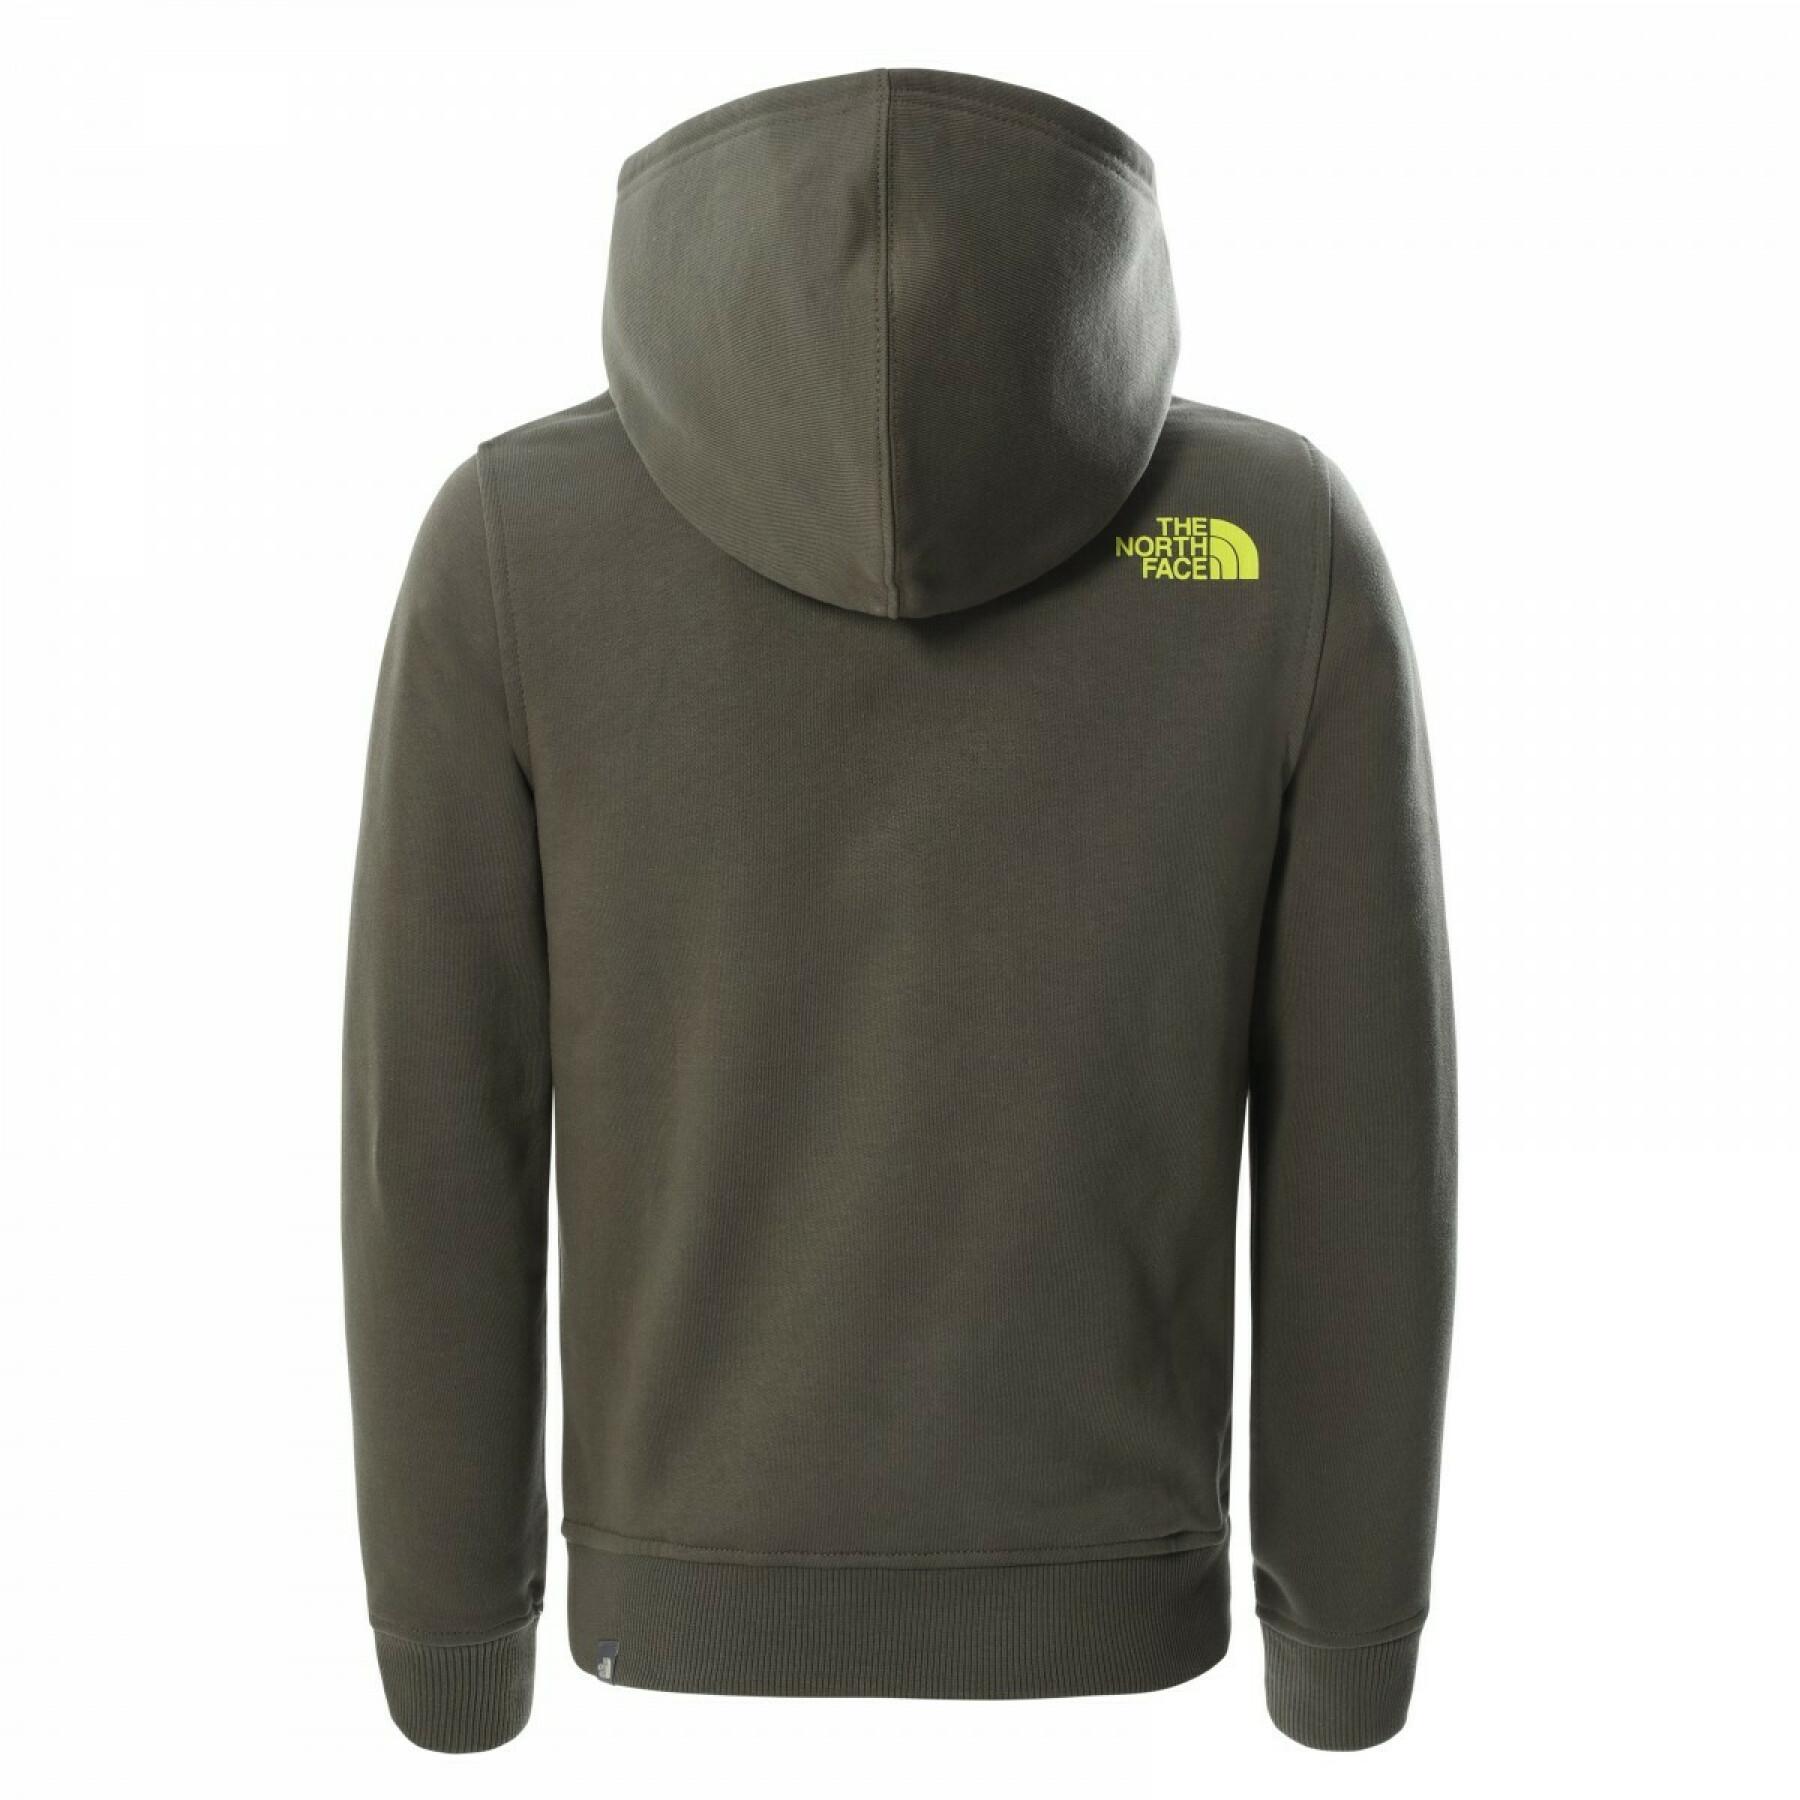 Hooded sweatshirt kind The North Face New Box Crew